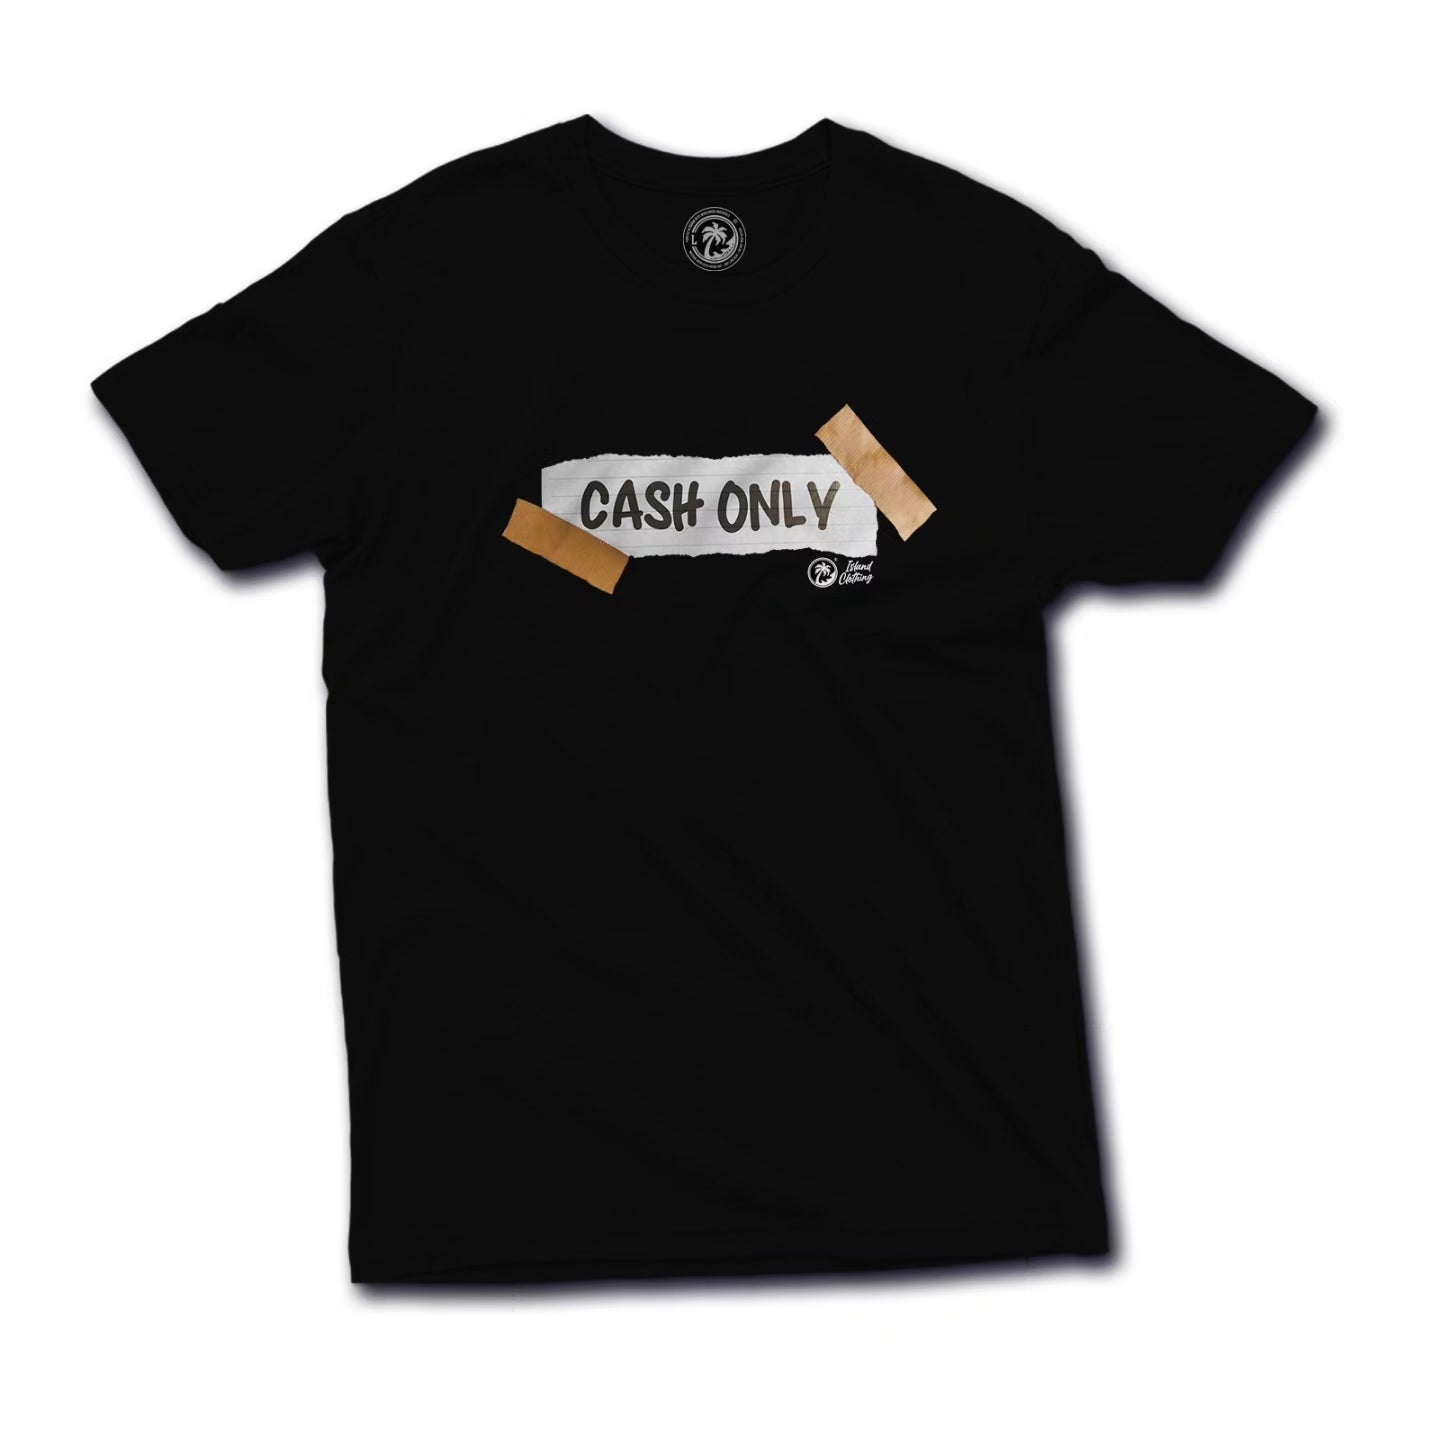 CASH ONLY Tee